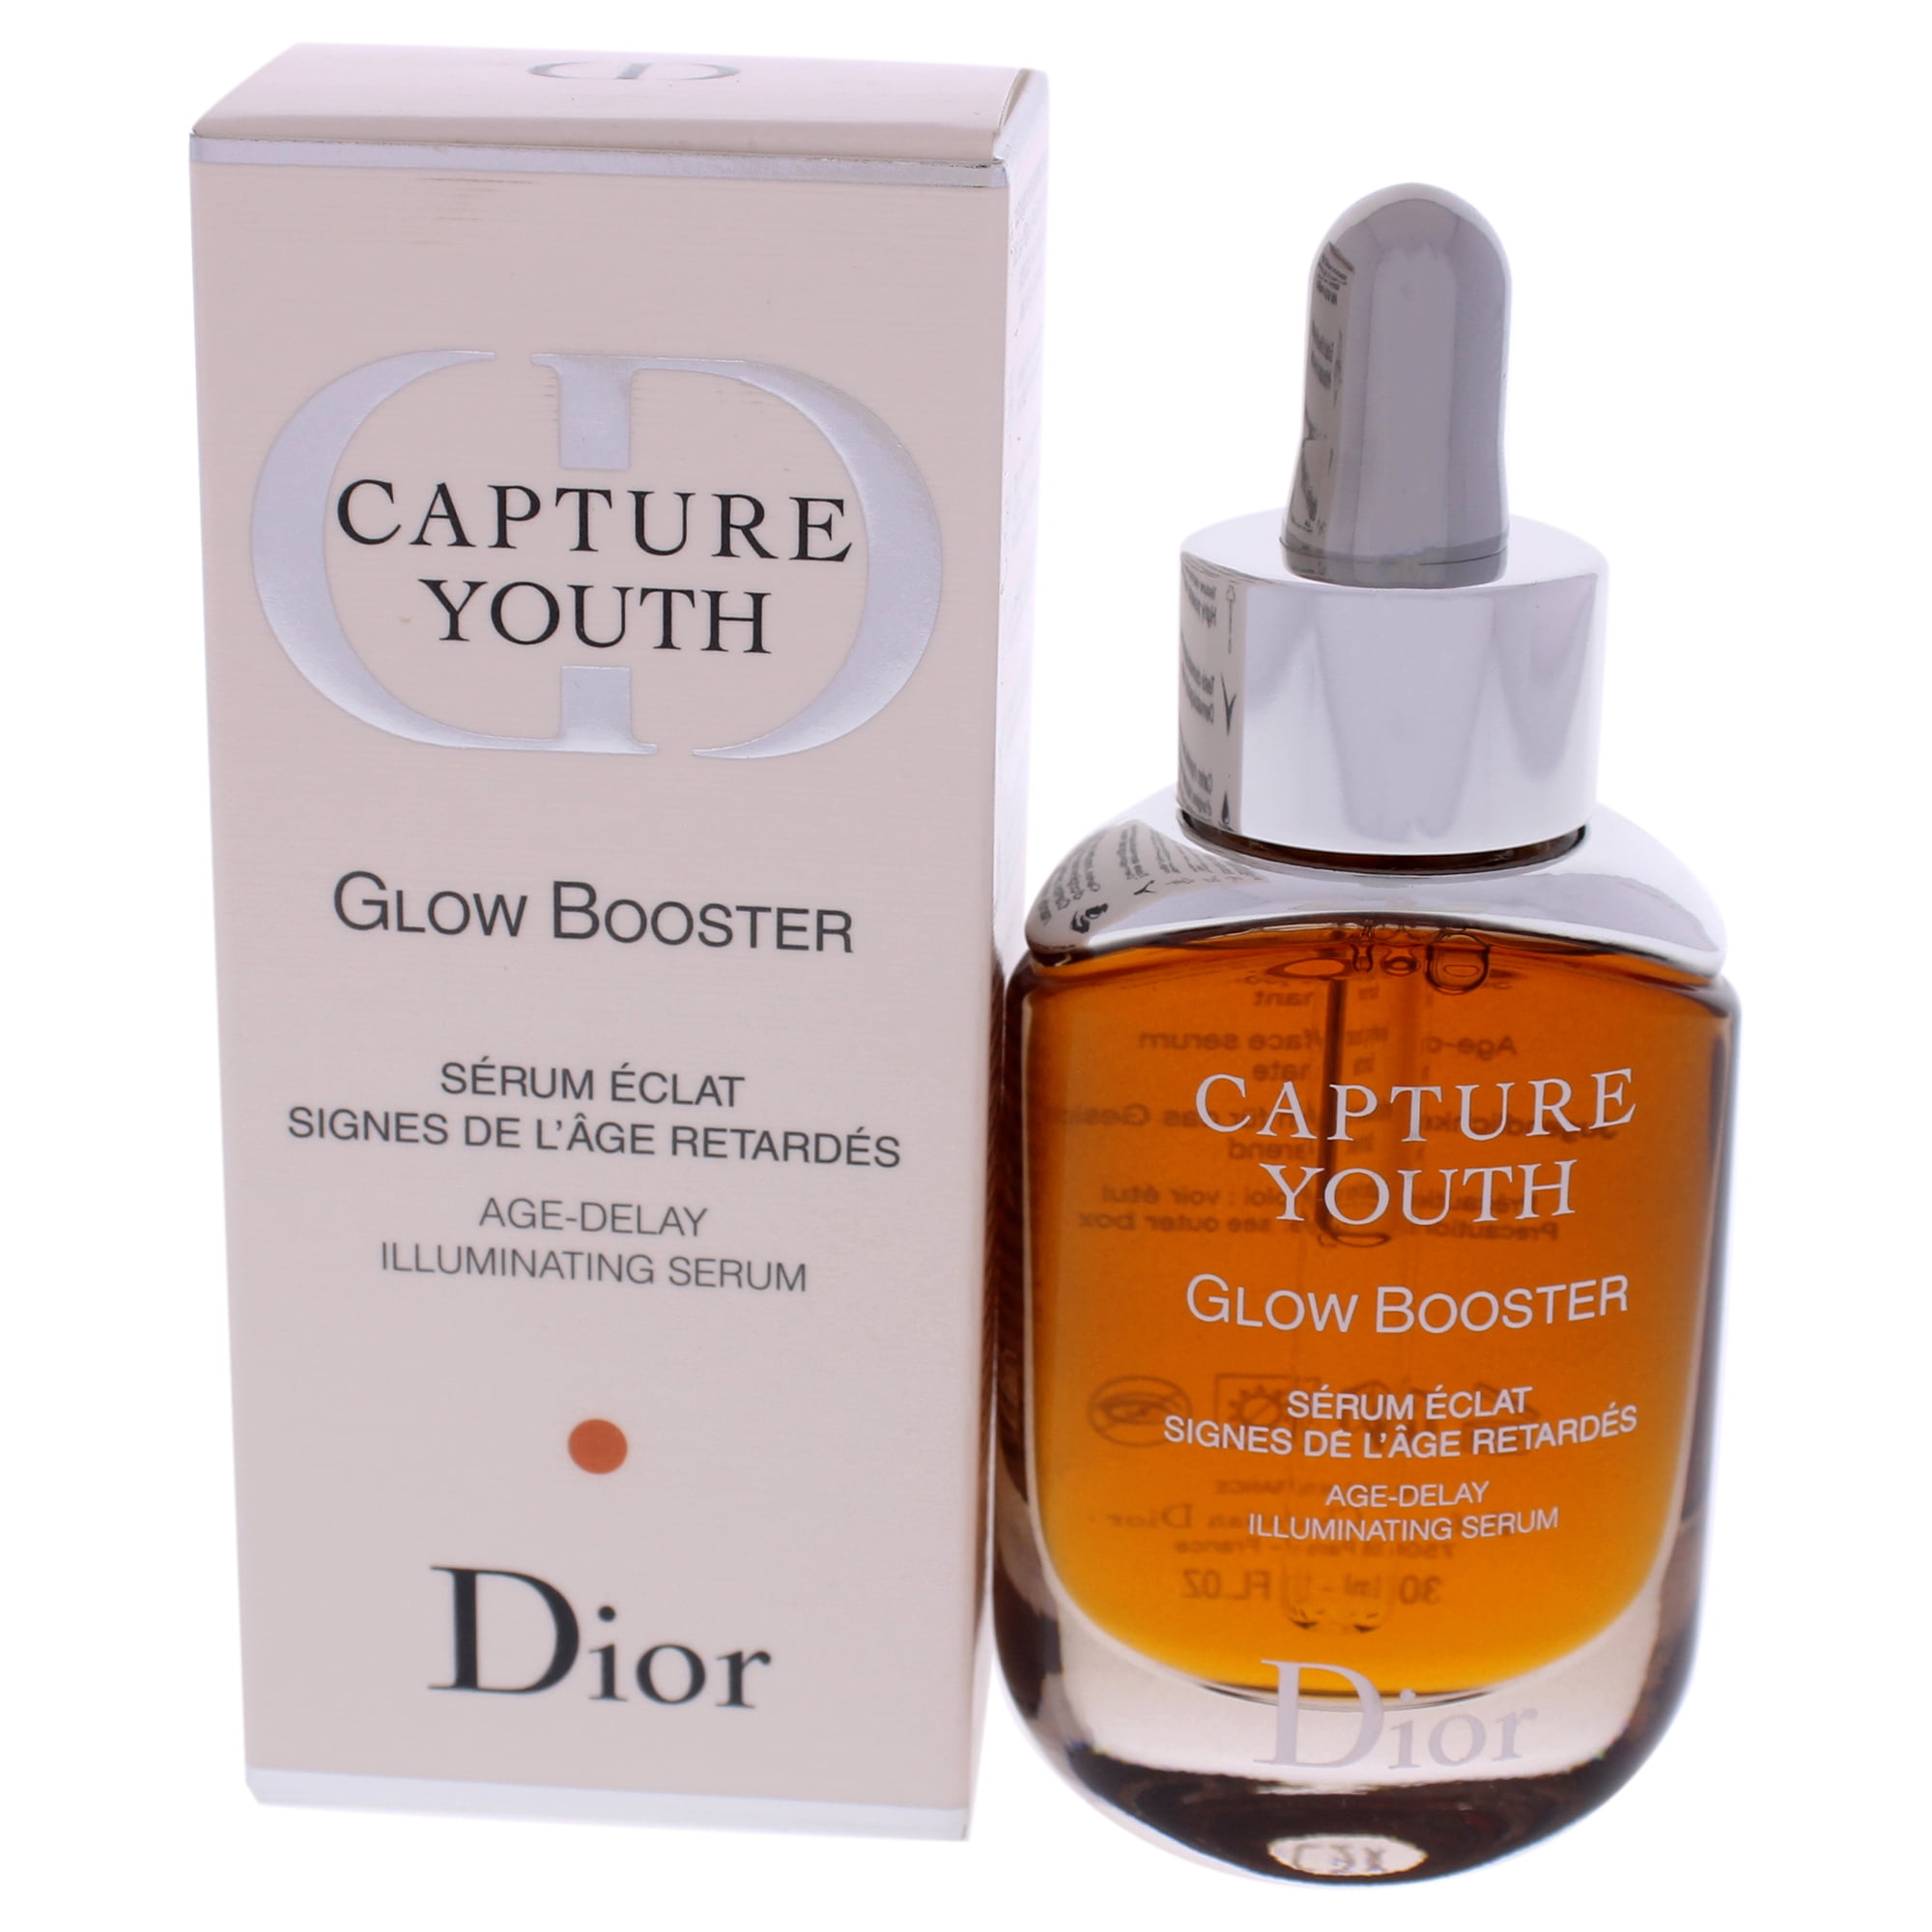 Dior Skincare Capture Youth Glow Booster Serum Review